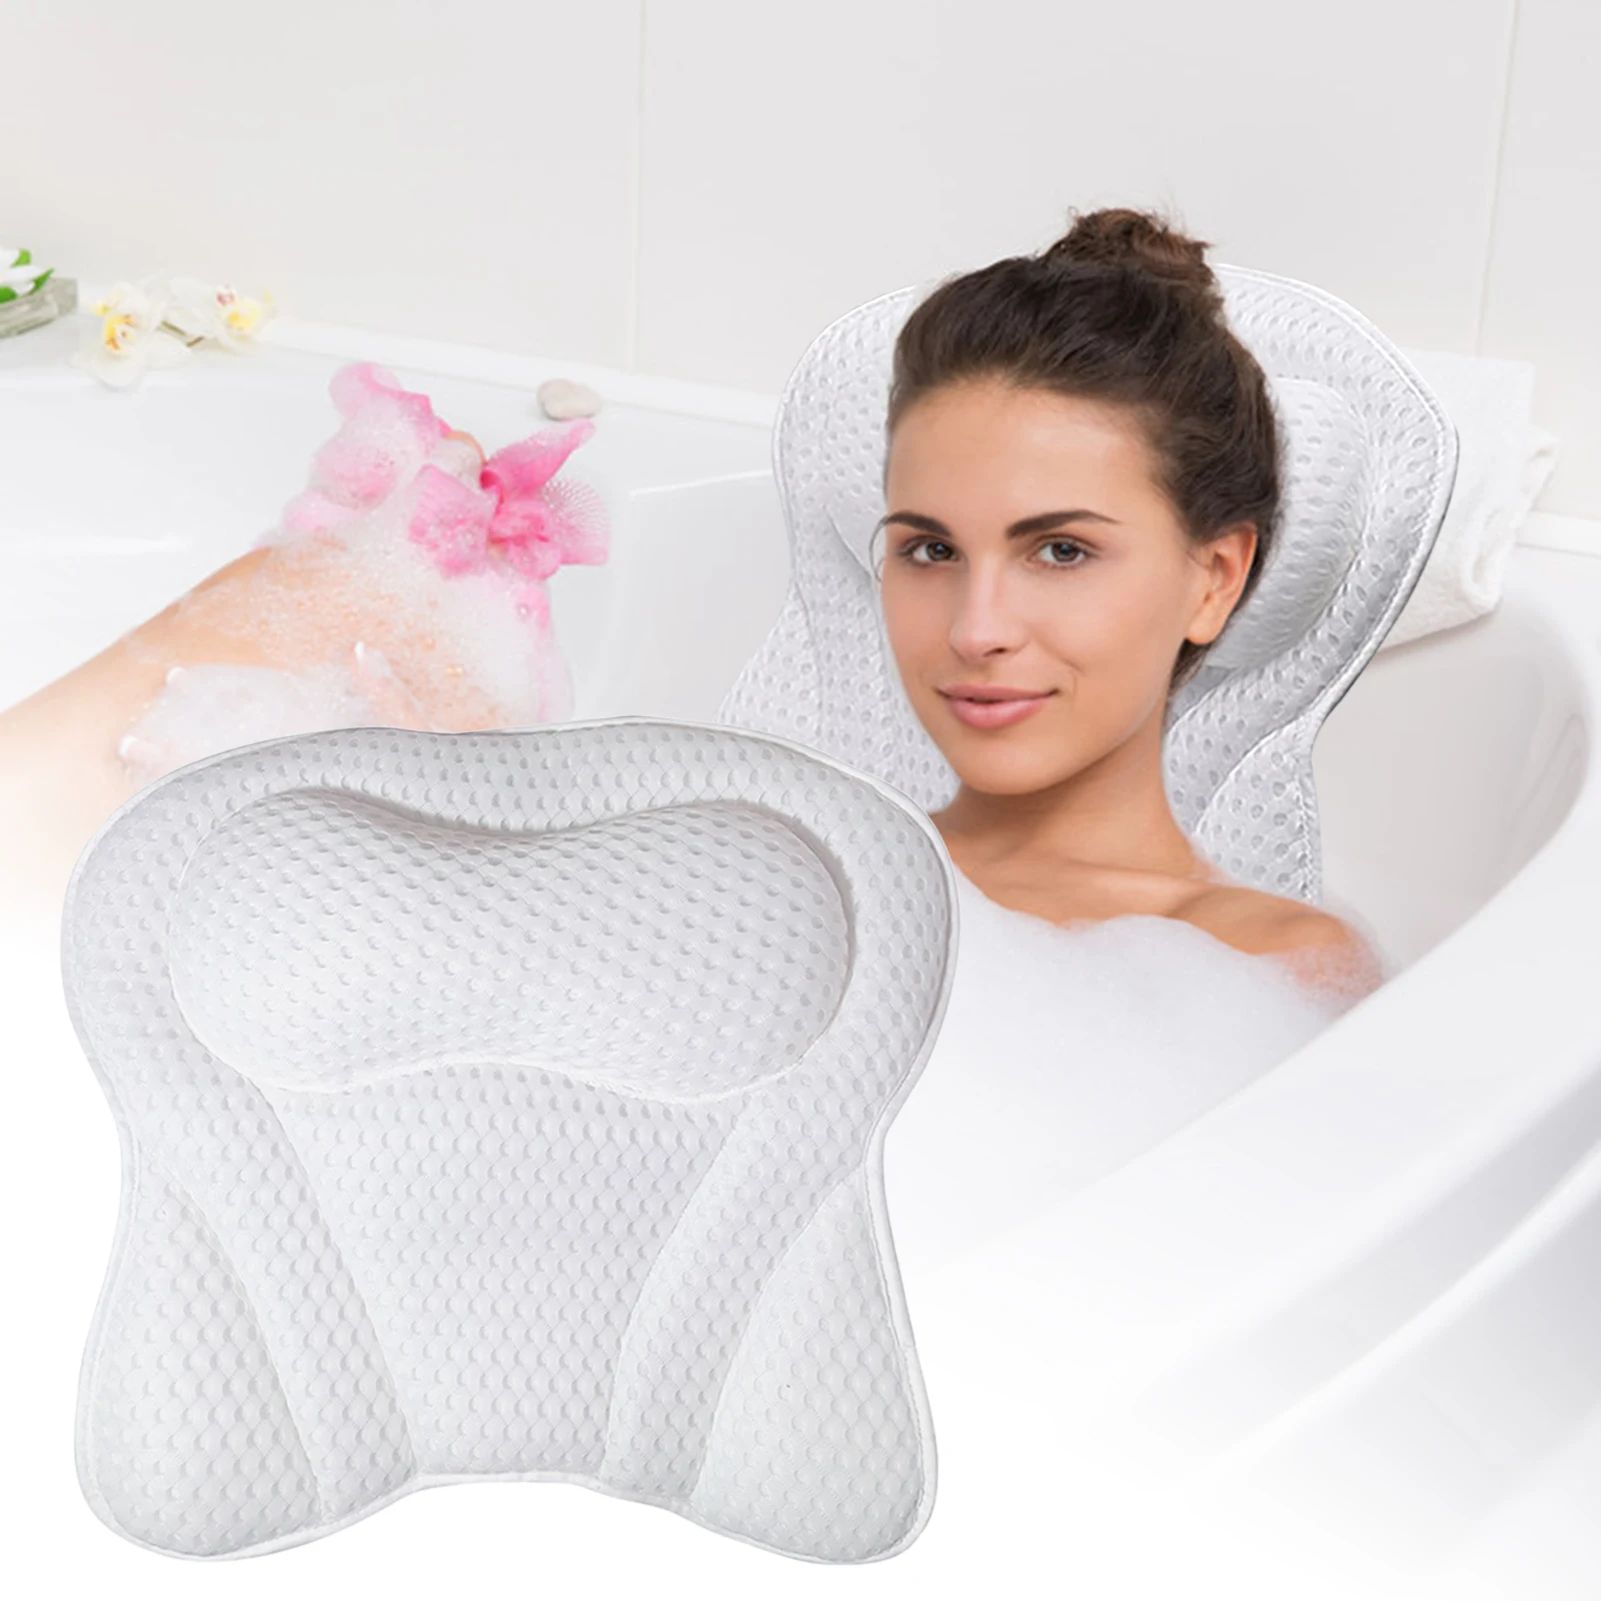 

New Bath Pillows For Head And Neck Comfortable 4D Air Mesh Technology Waterproof Bath Pillow Cushion With Non-Slip Suction Cups